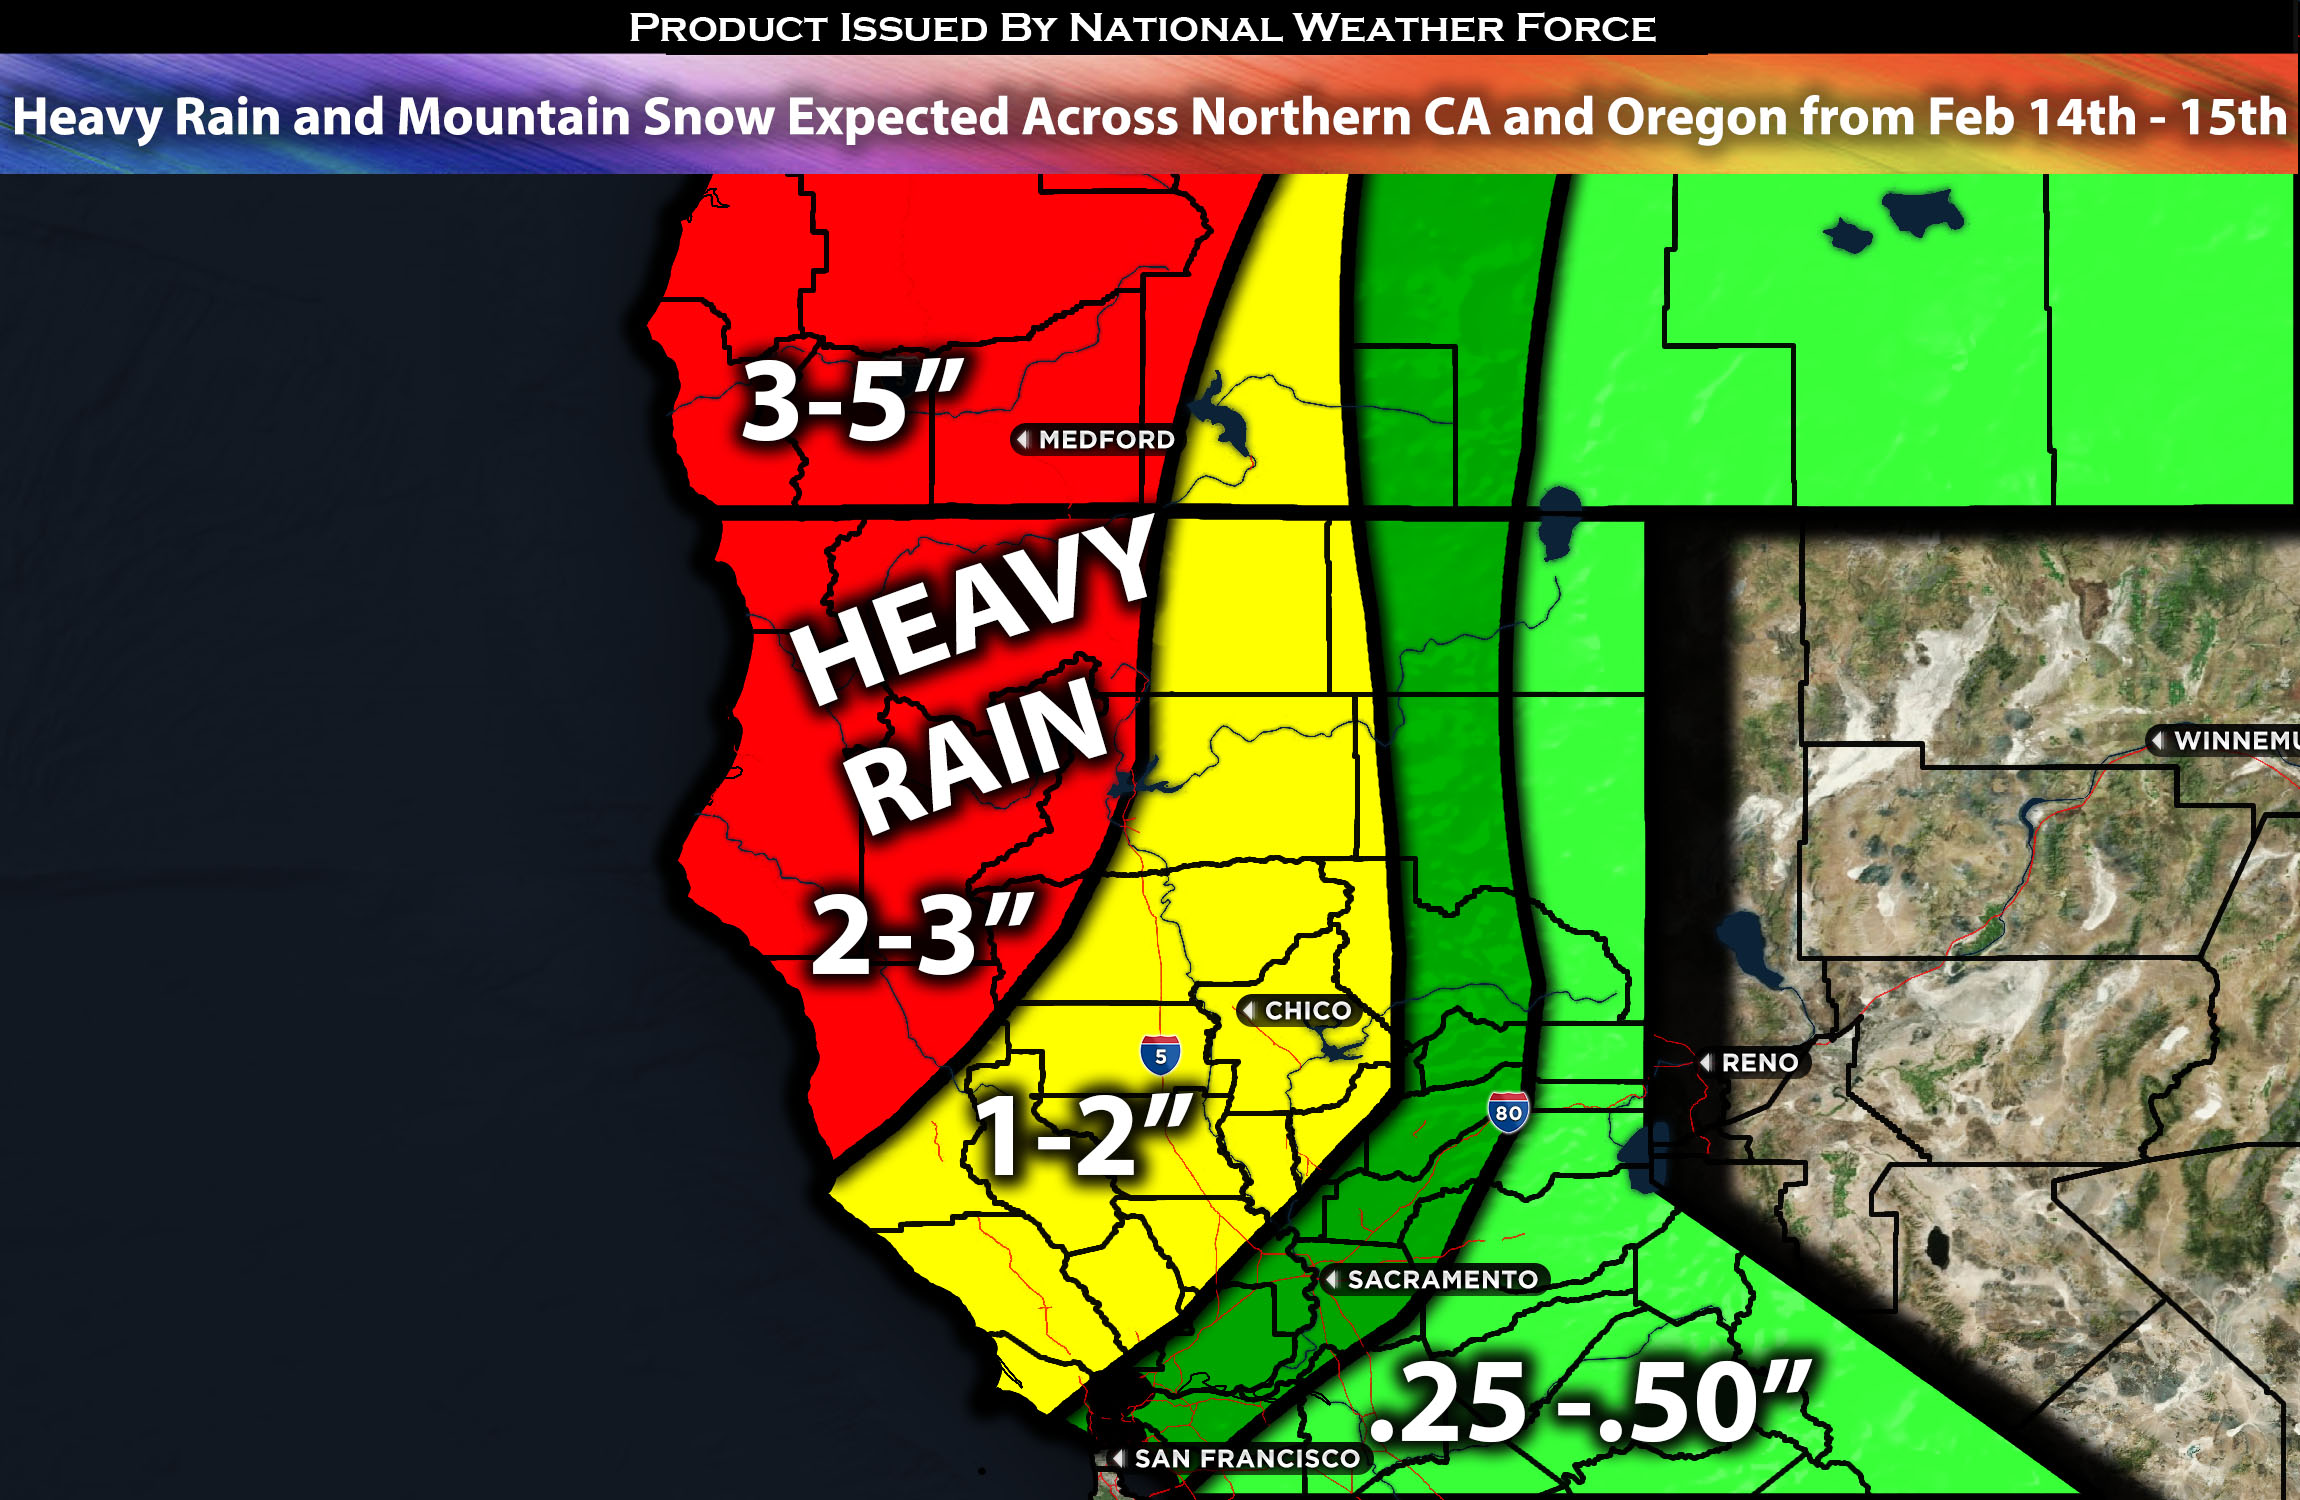 Heavy Rain, Mountain Snow Expected Across Northern CA and Oregon from Feb 14th – 15th